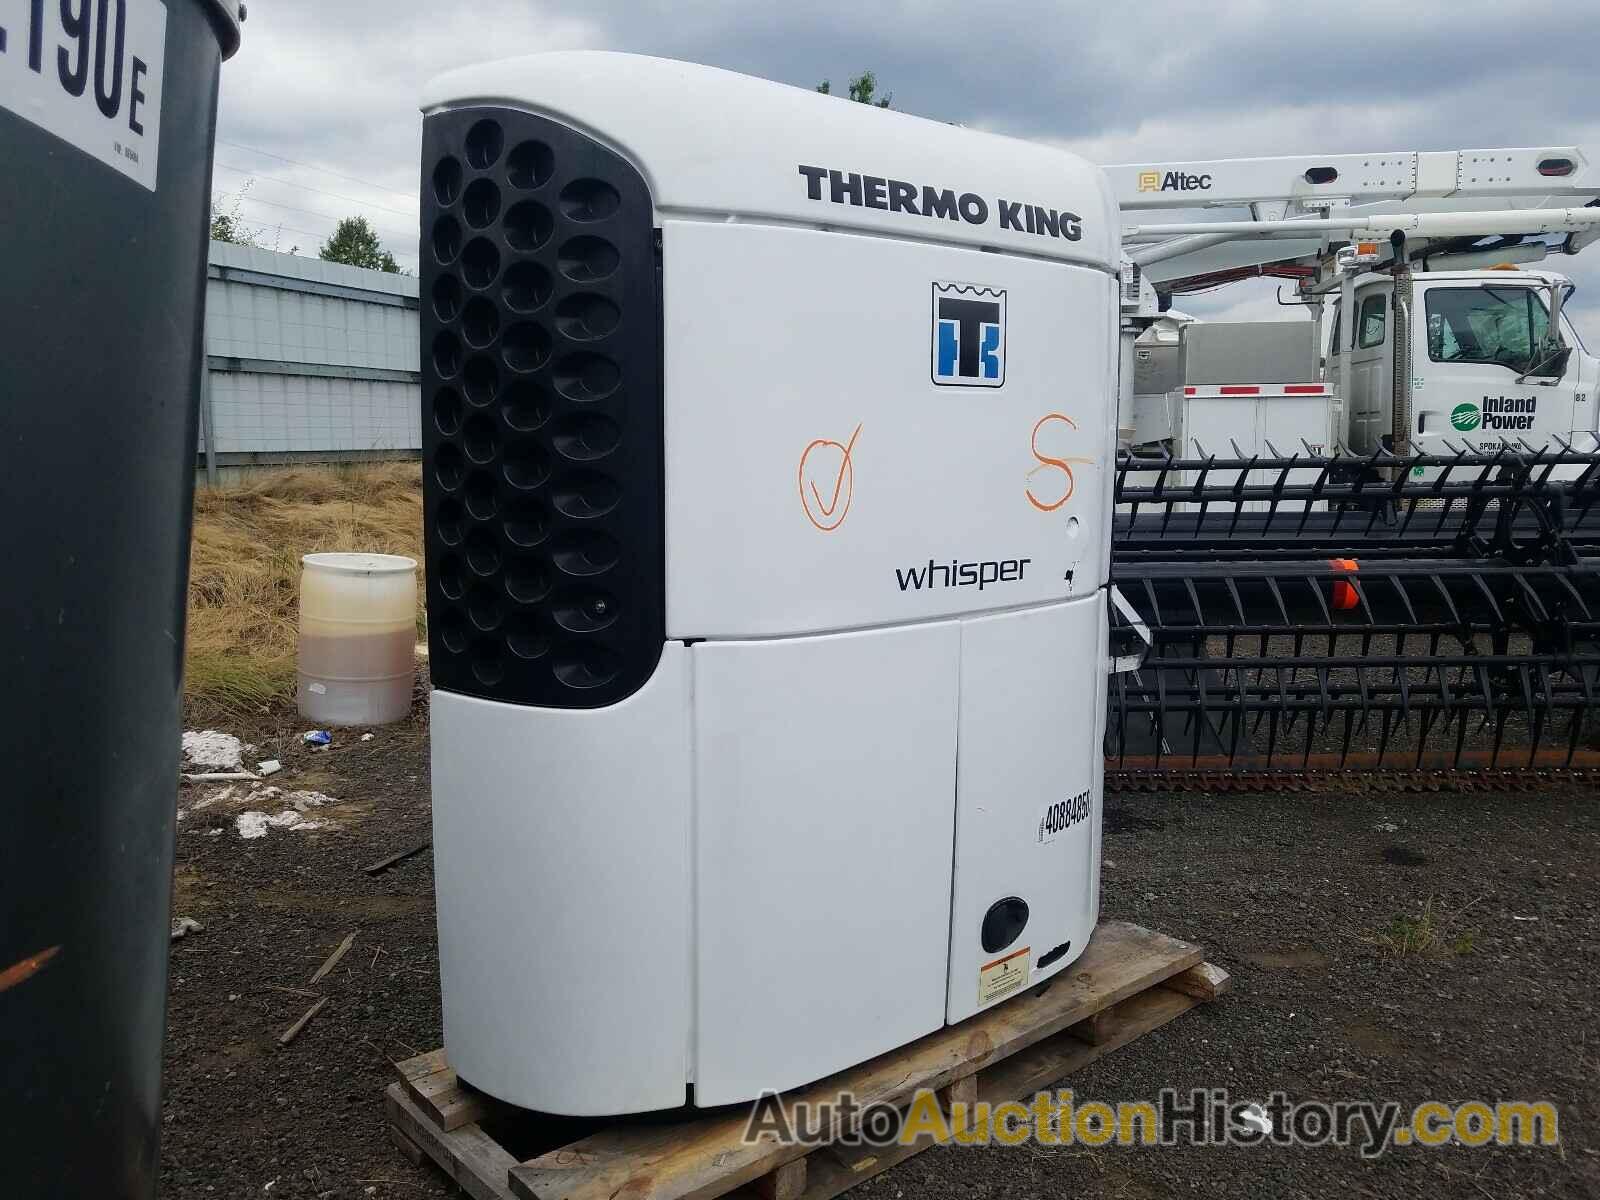 2014 THER THERMOKING, 6001356785